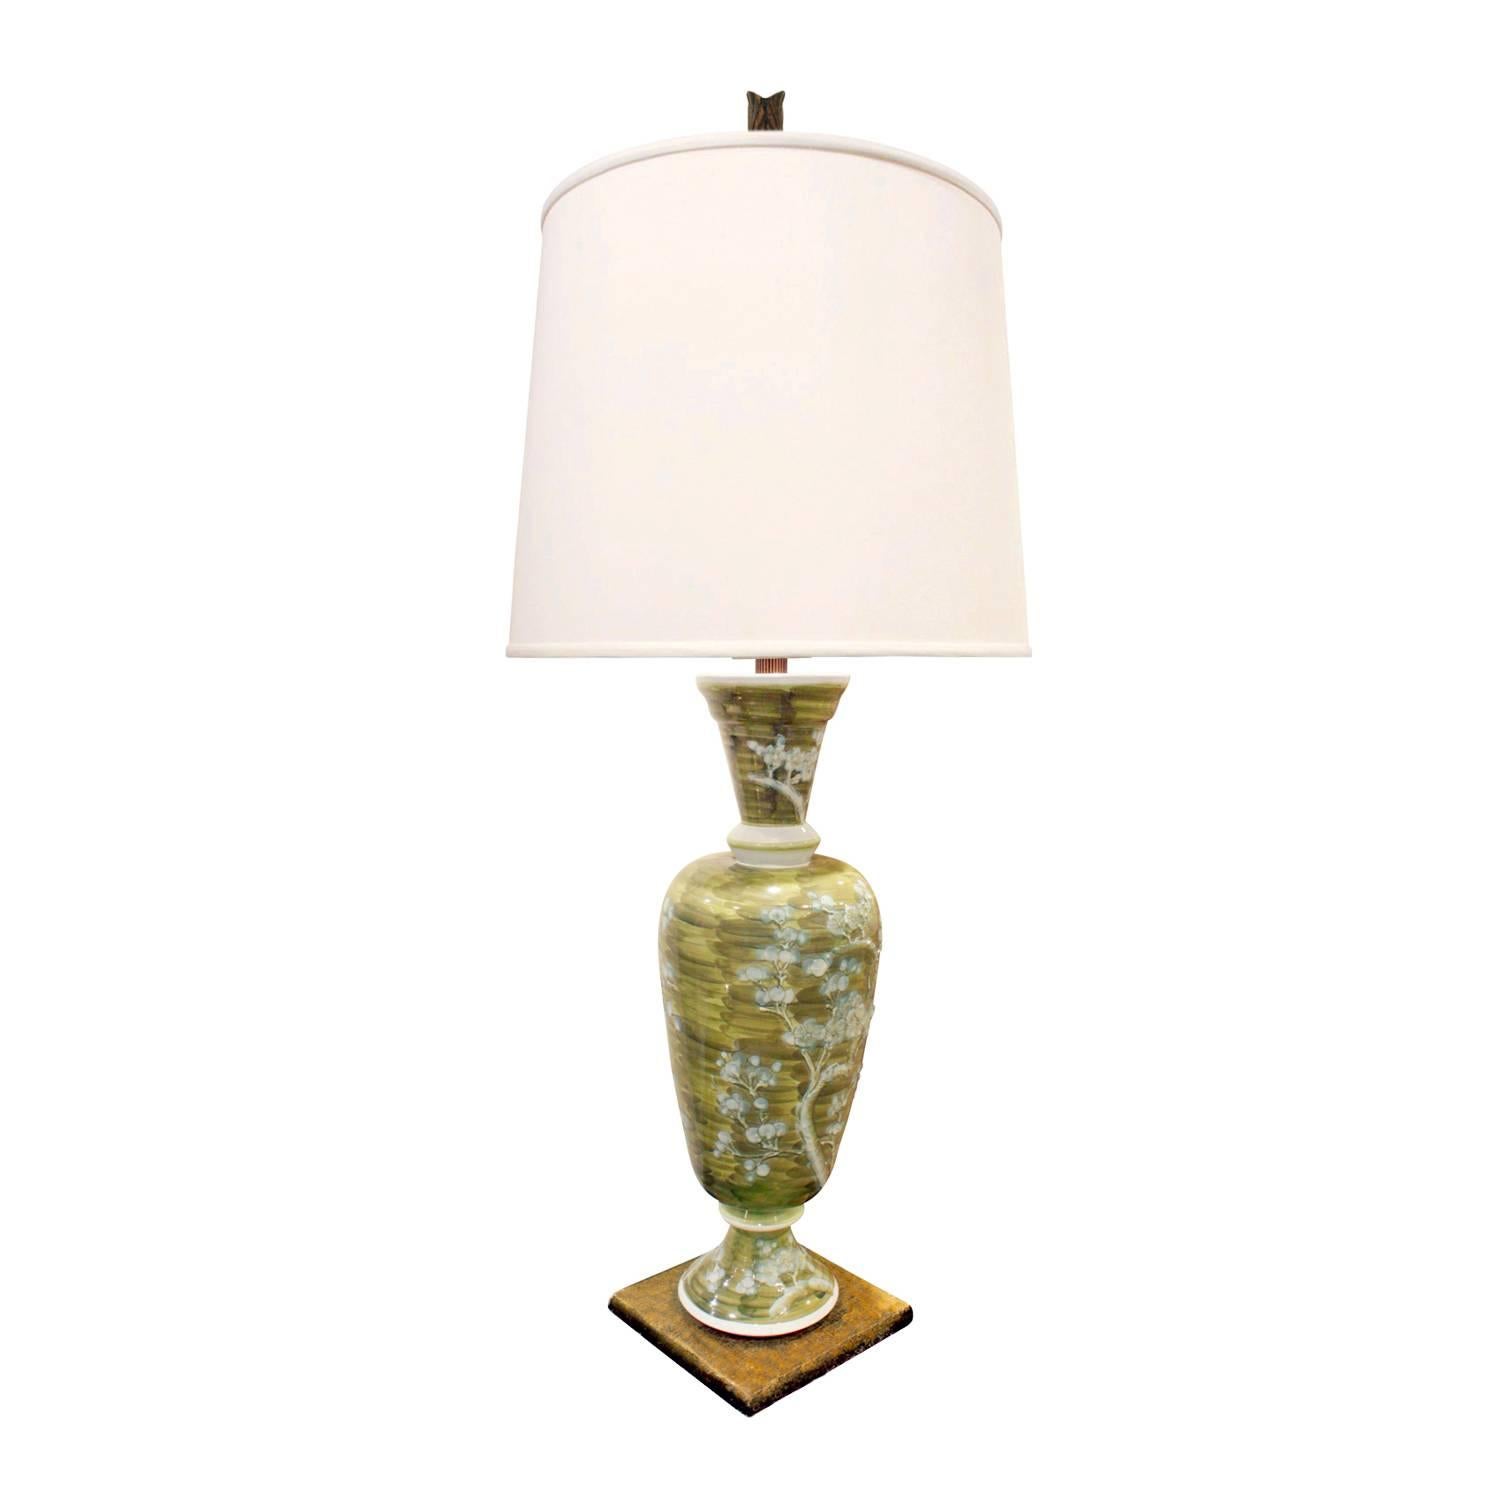 Studio made sage green porcelain table lamp with hand-painted blue flowers, on a gilded base, French, 1950s.

Measures: Shade diameter: 14 inches.